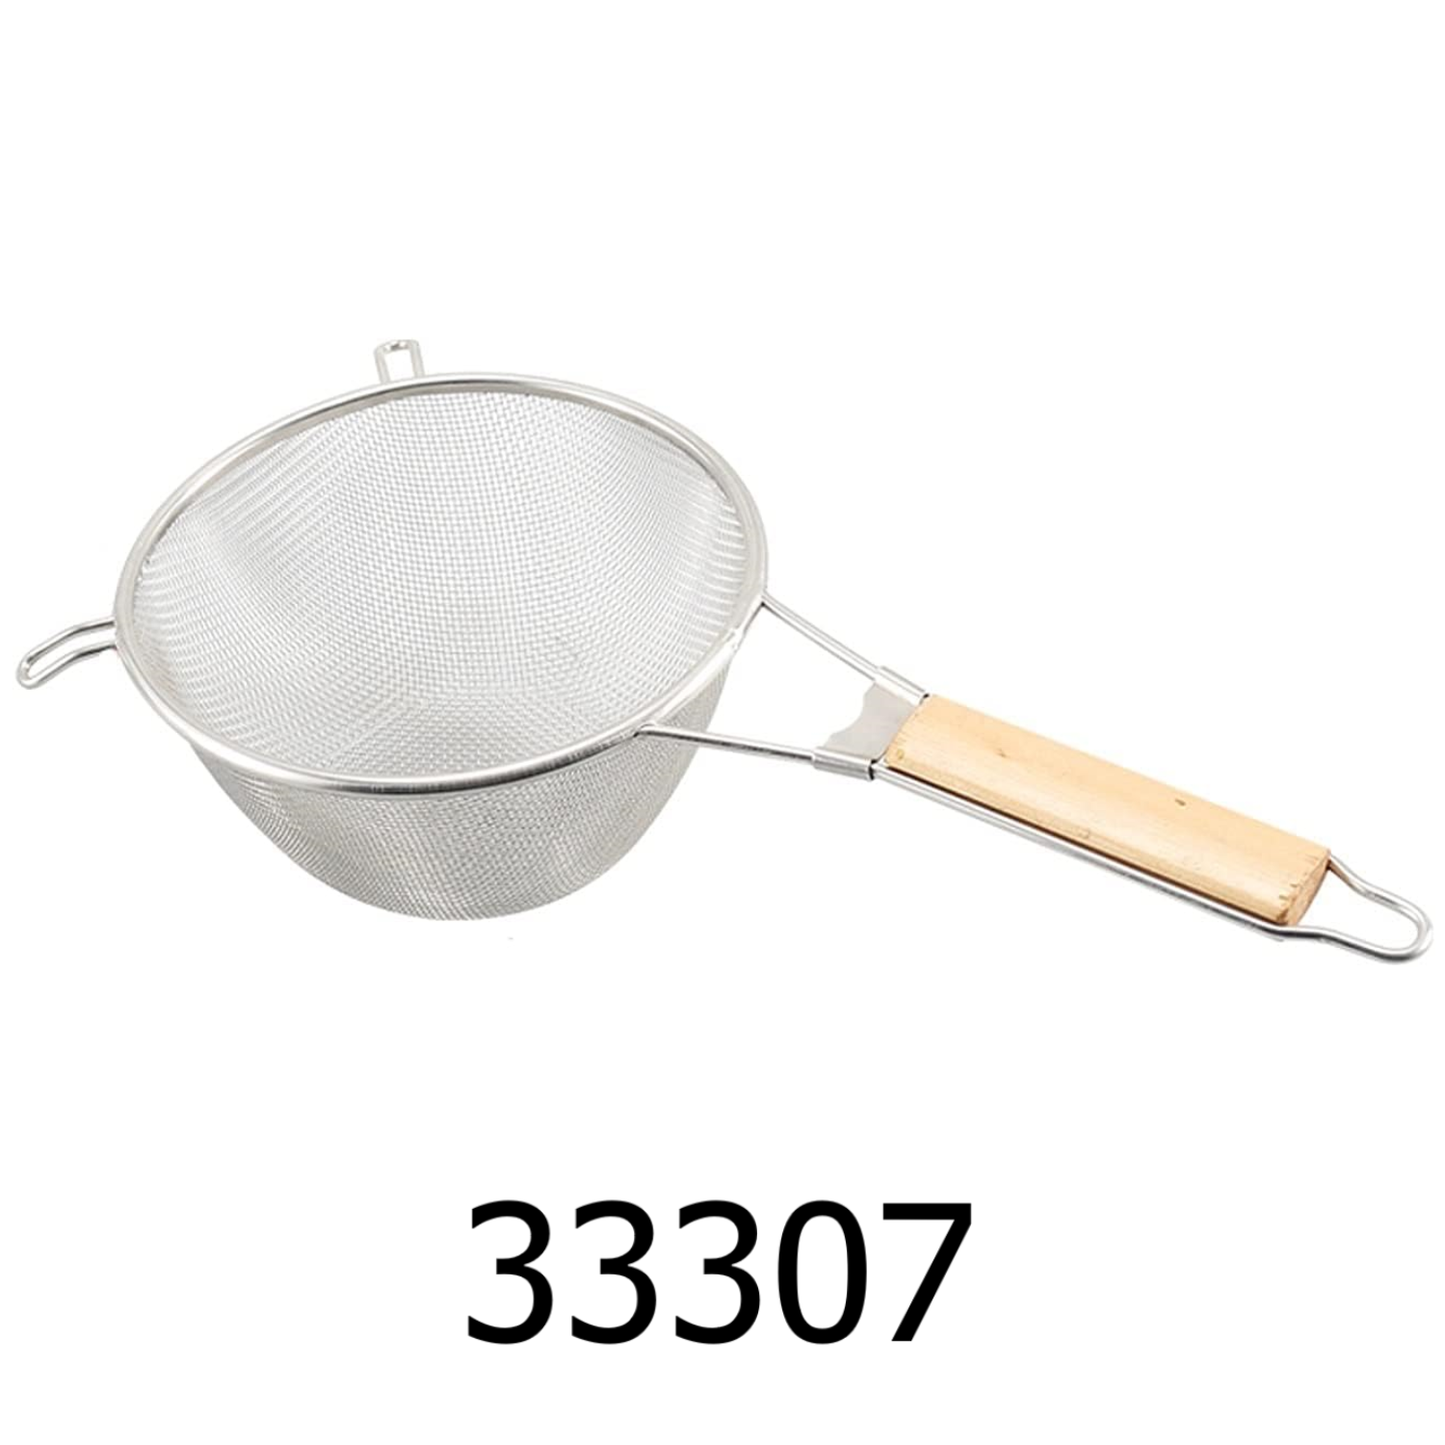 7" Stainless Steel Strainer with Wooden Handle